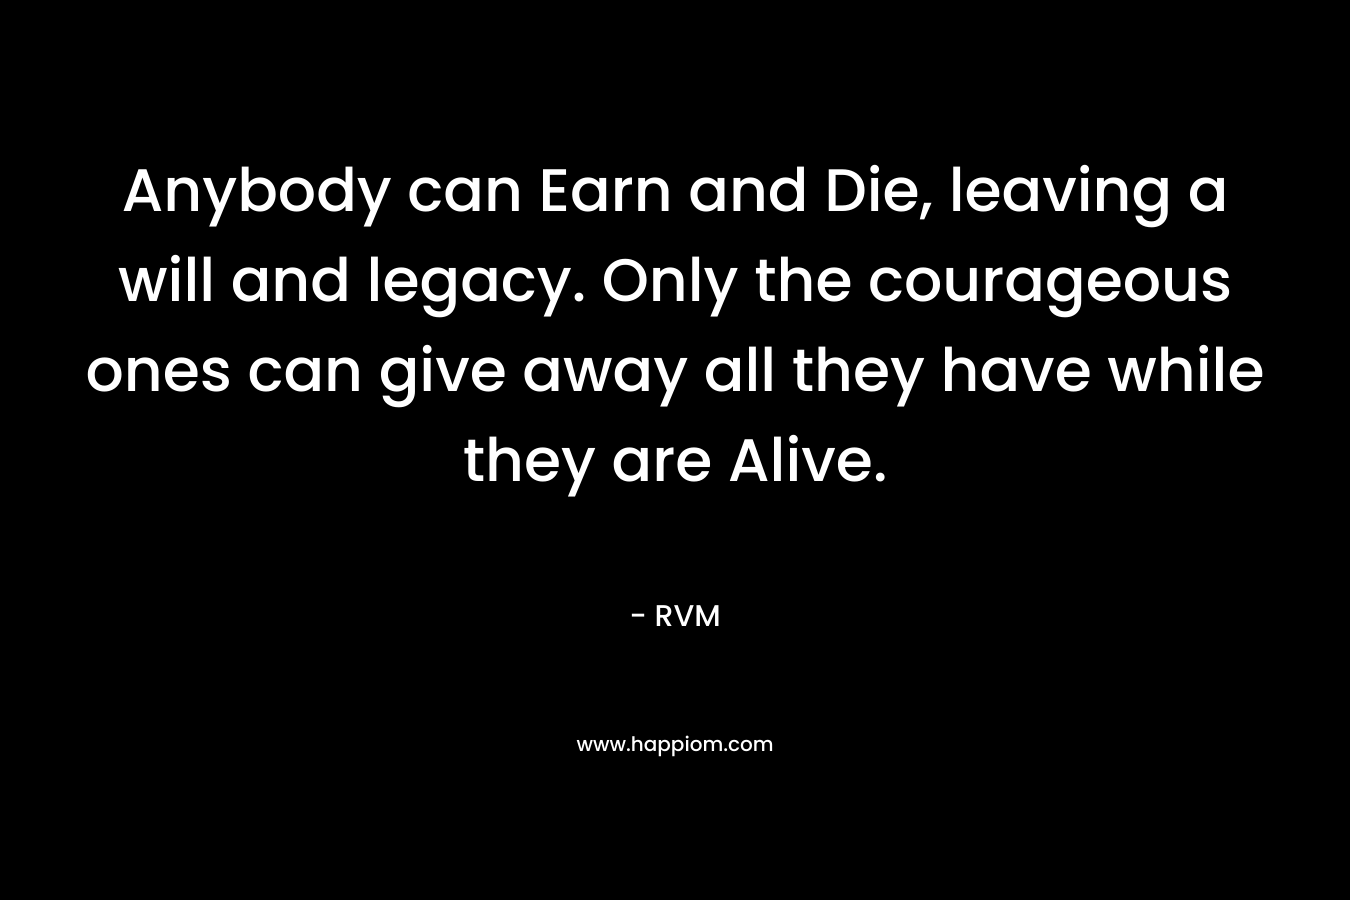 Anybody can Earn and Die, leaving a will and legacy. Only the courageous ones can give away all they have while they are Alive.